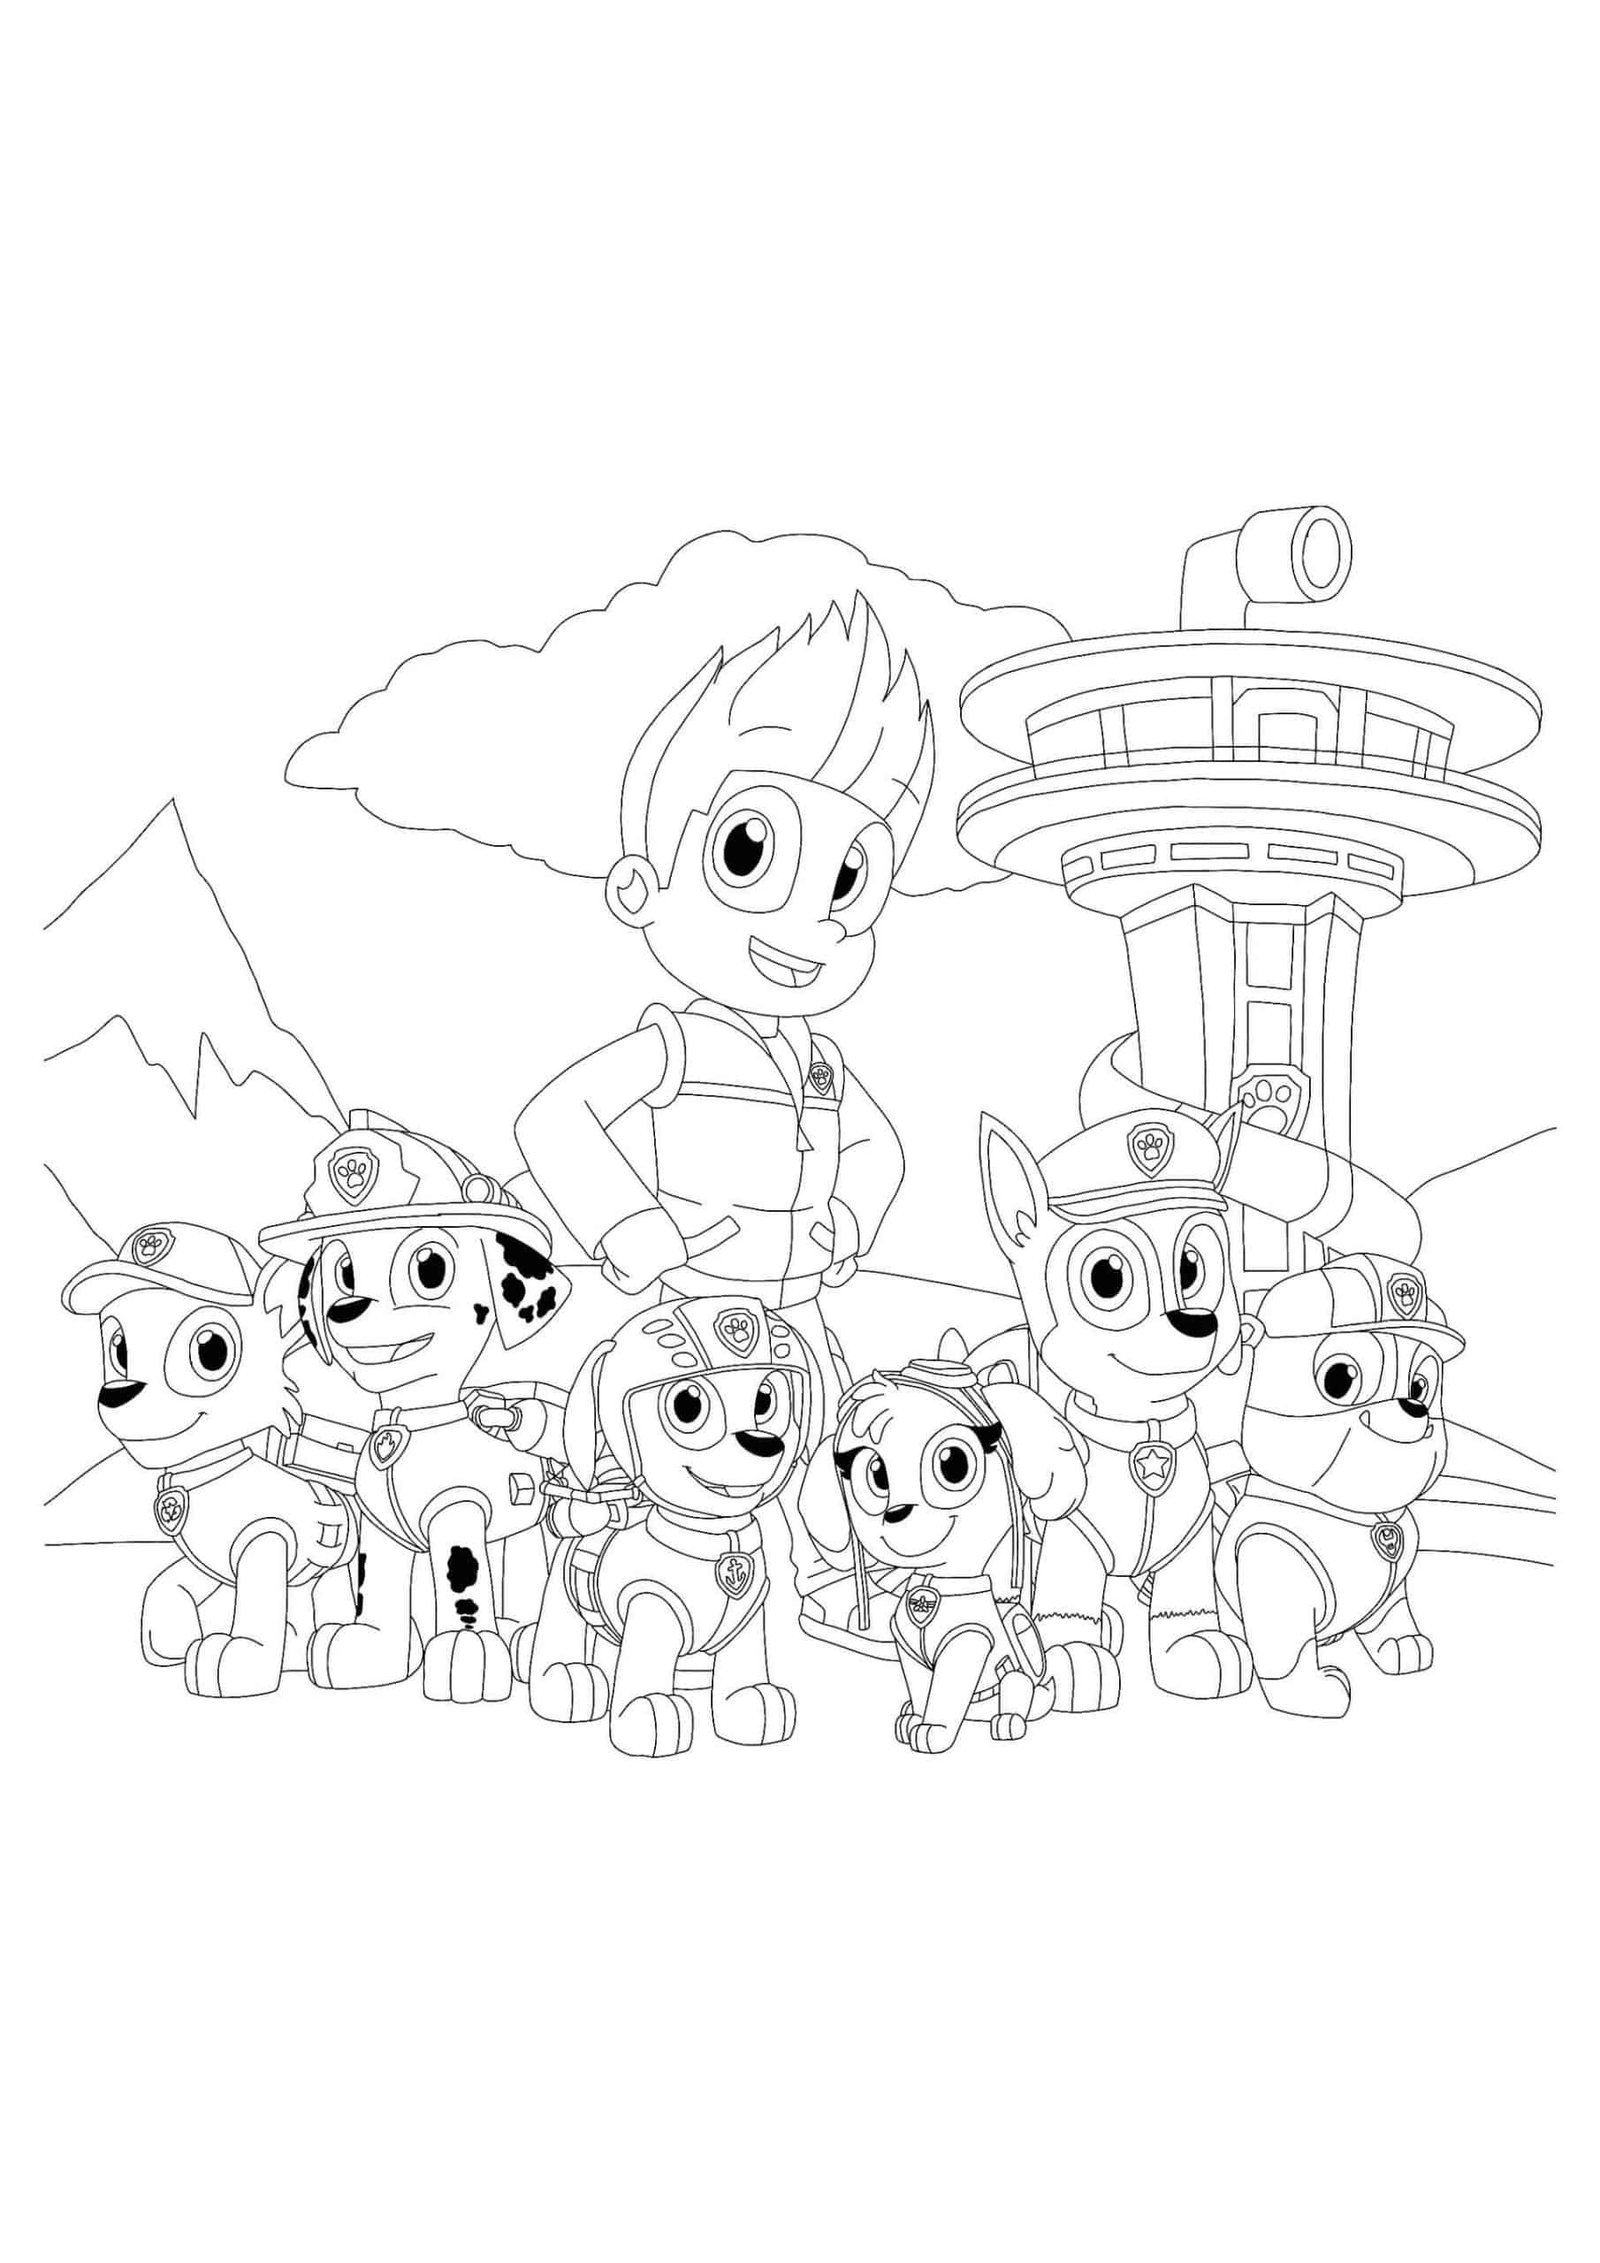 Paw patrol ryder coloring pages